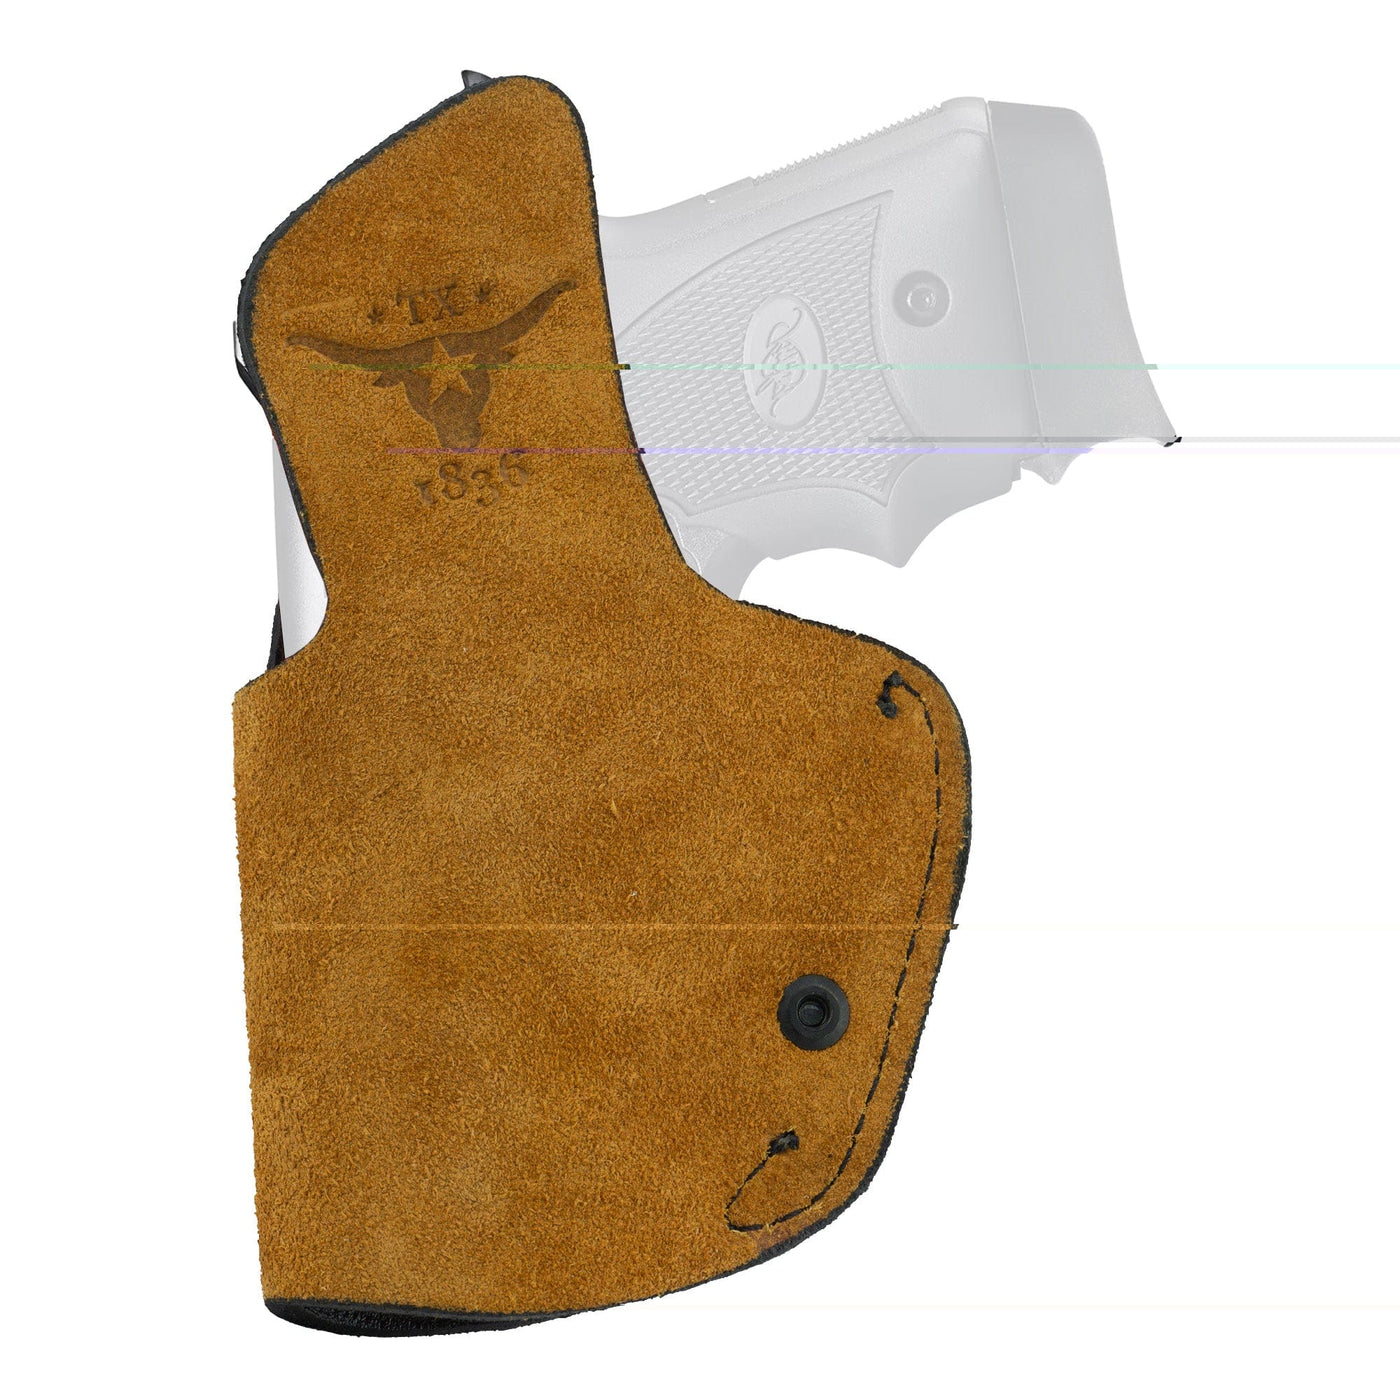 Tagua Tag Iwb Or Holster For Glock 19 Holsters